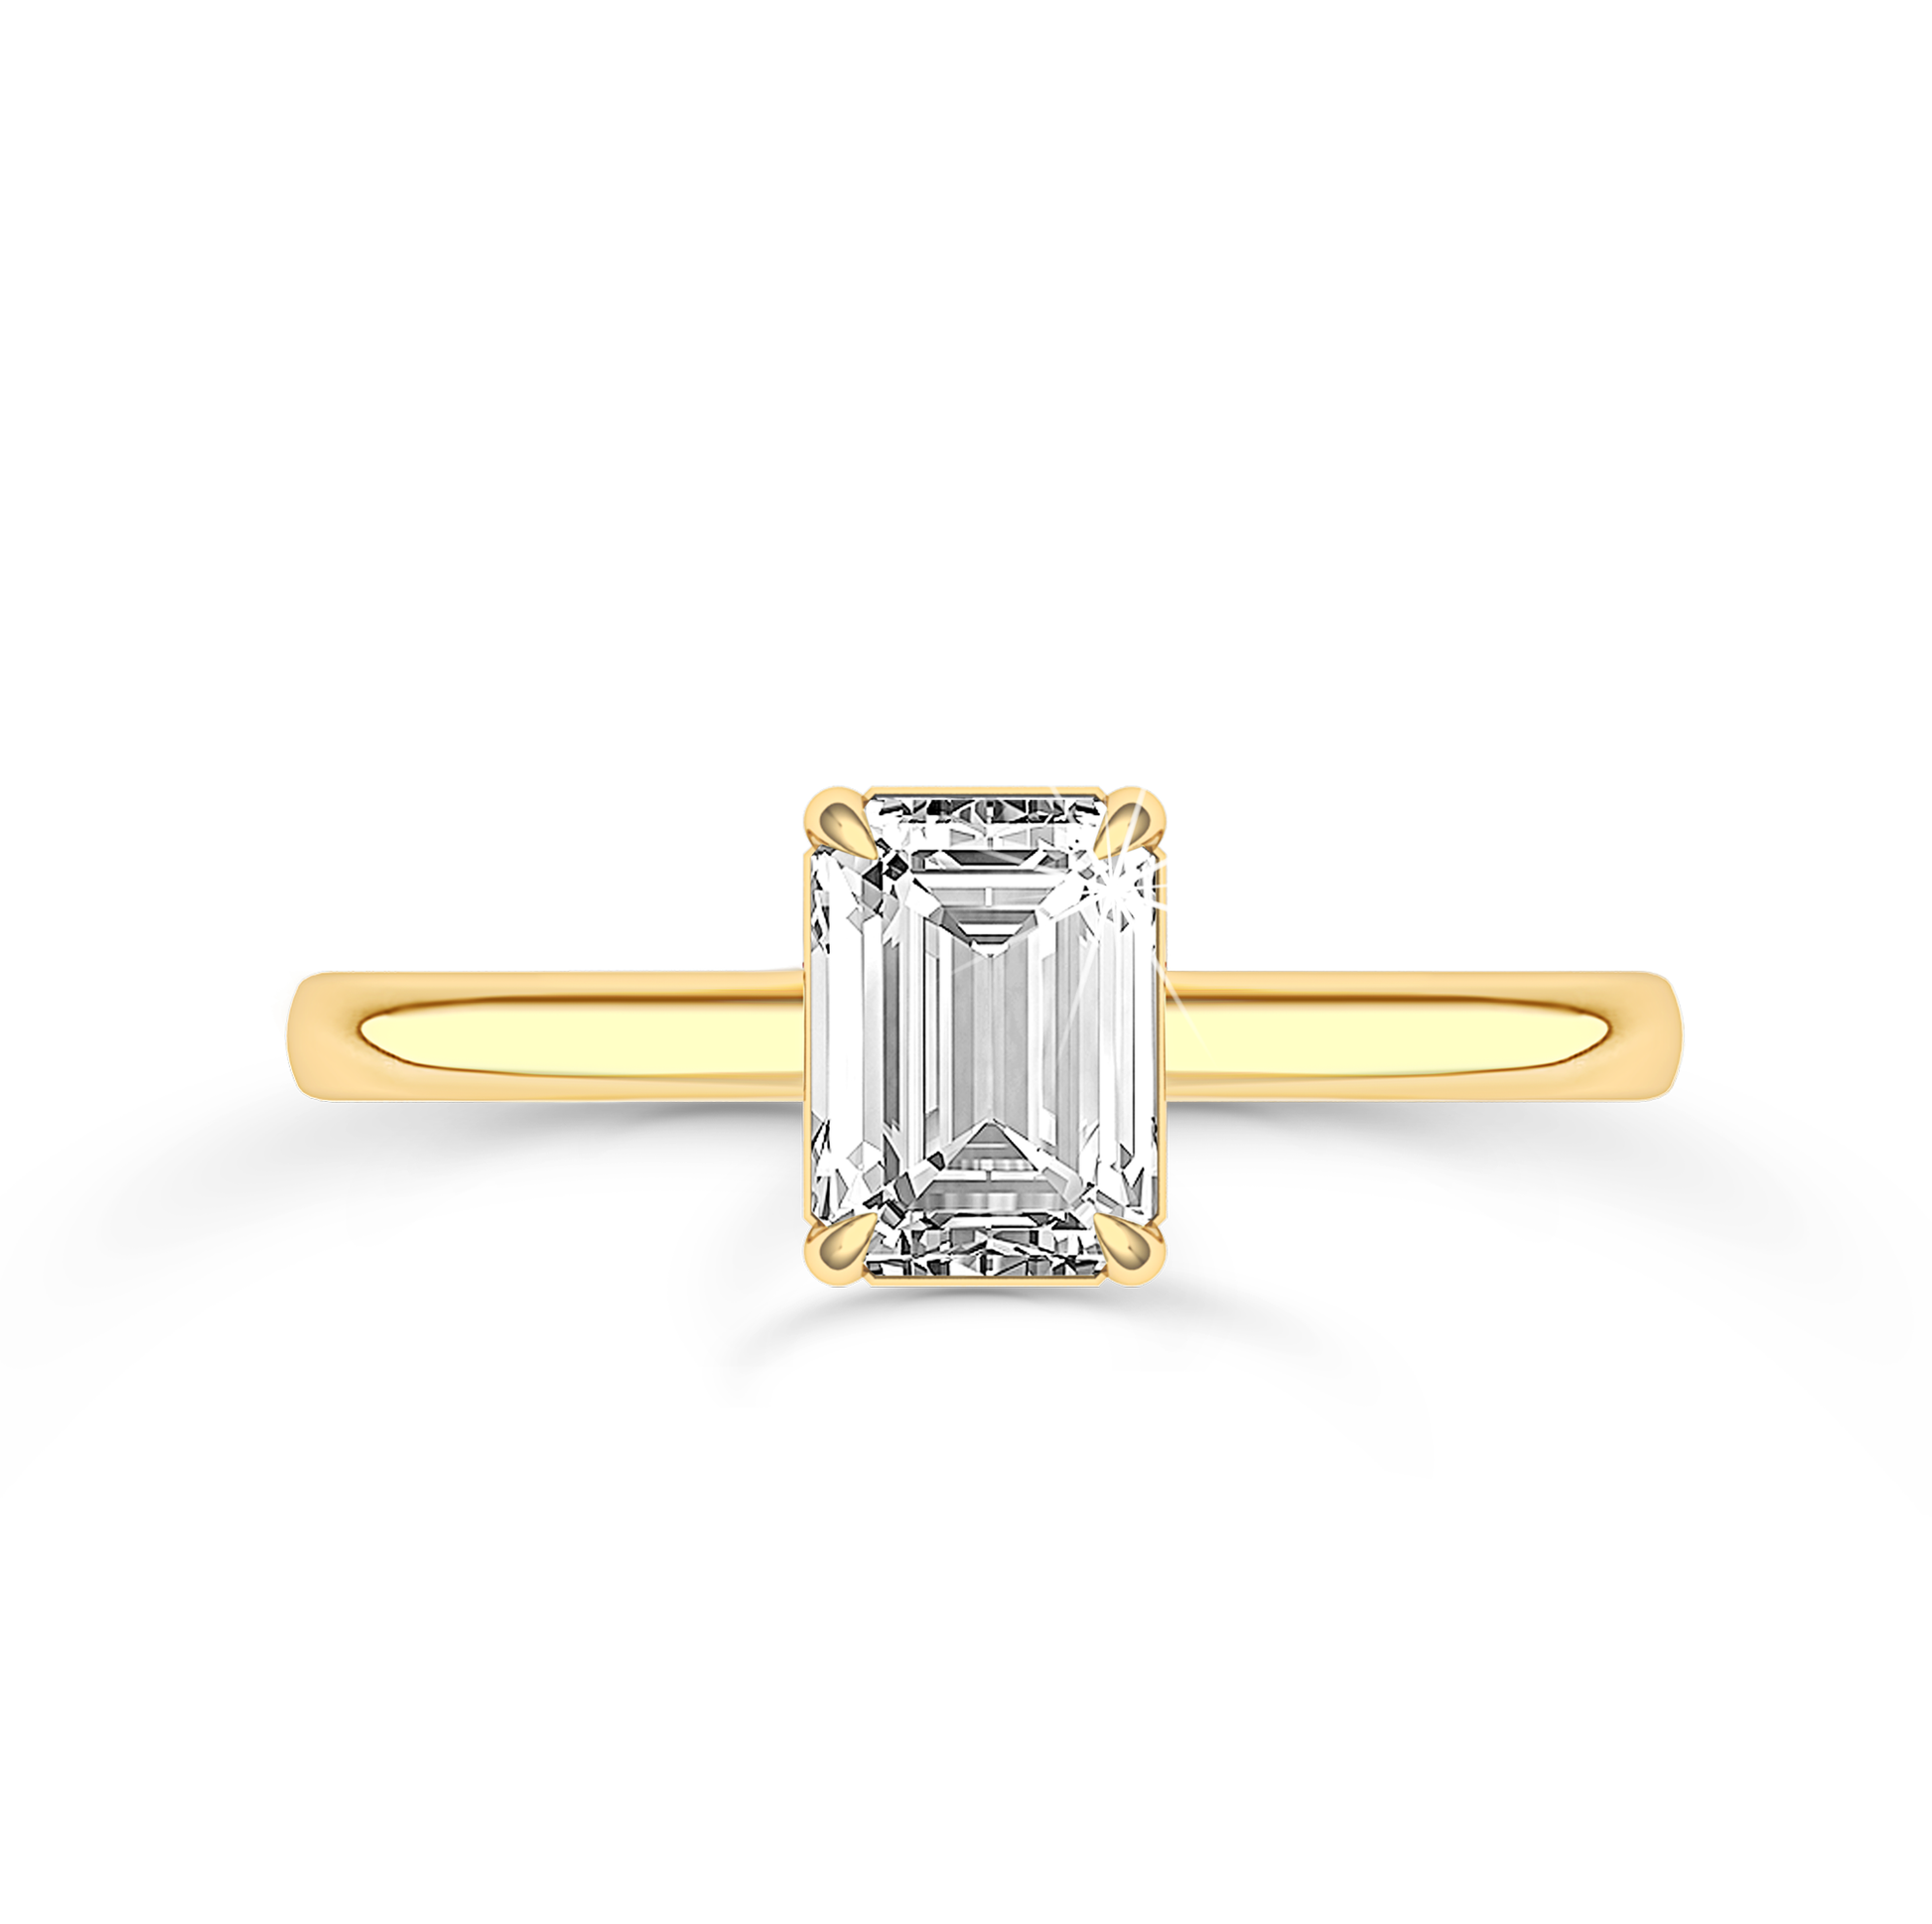 Emerald Cut Solitaire Ring in flush setting - Yellow Gold - Bodega